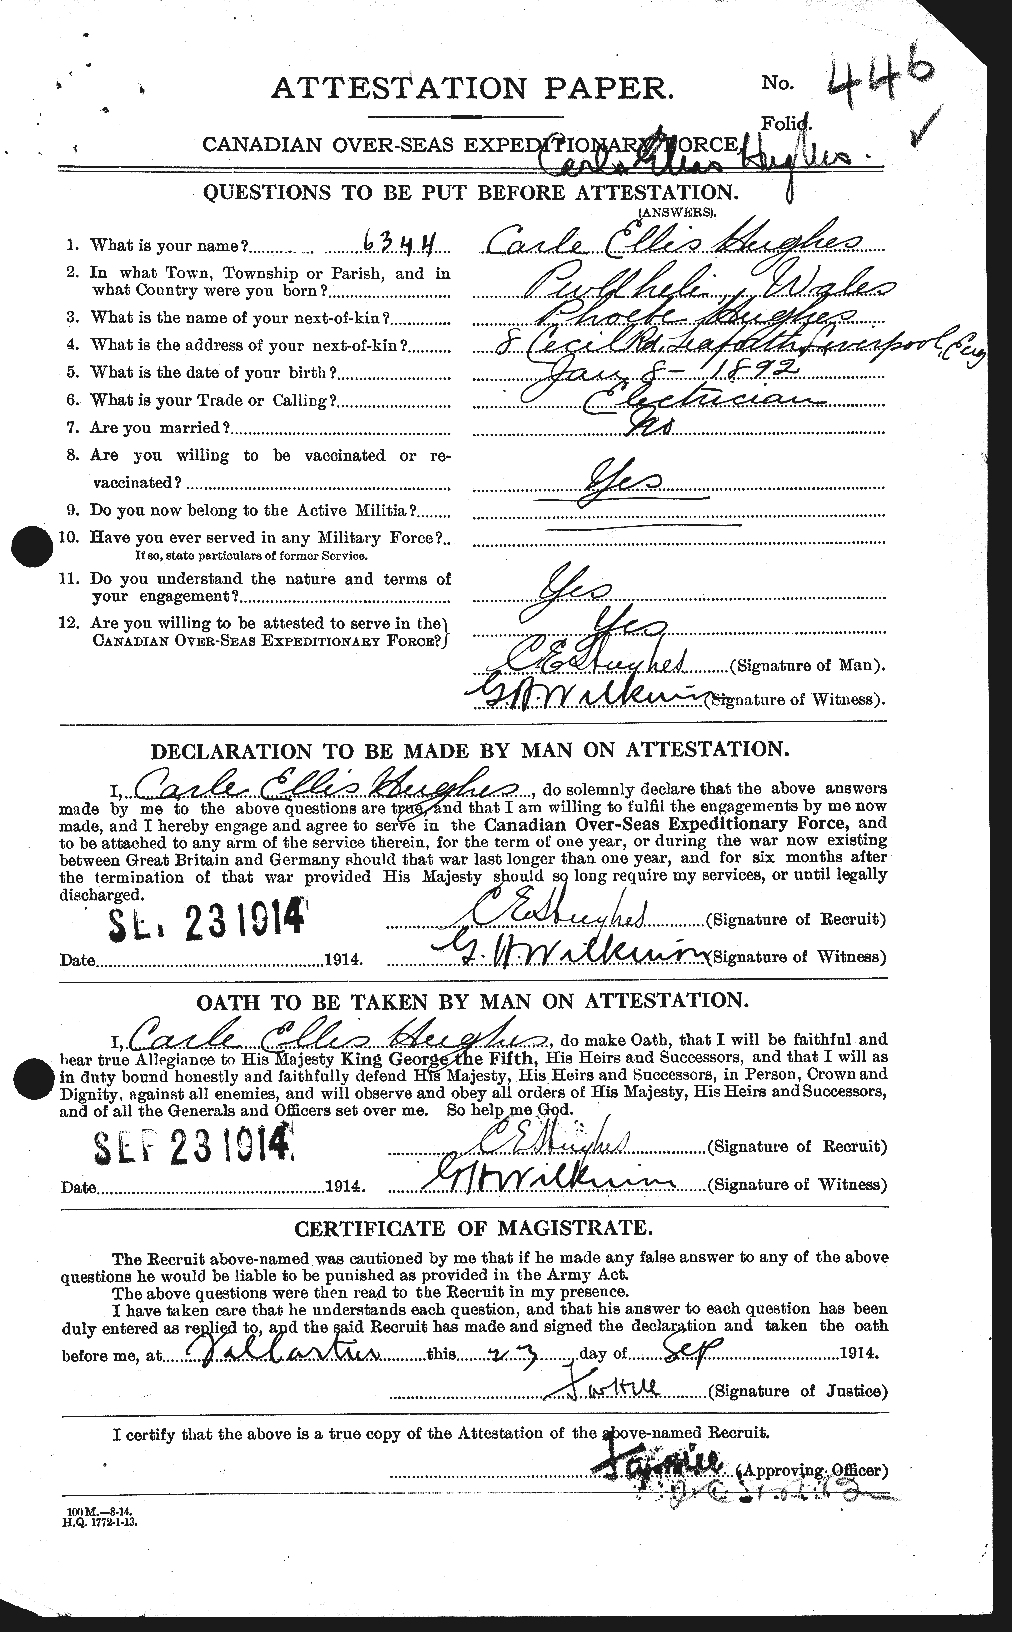 Personnel Records of the First World War - CEF 402592a